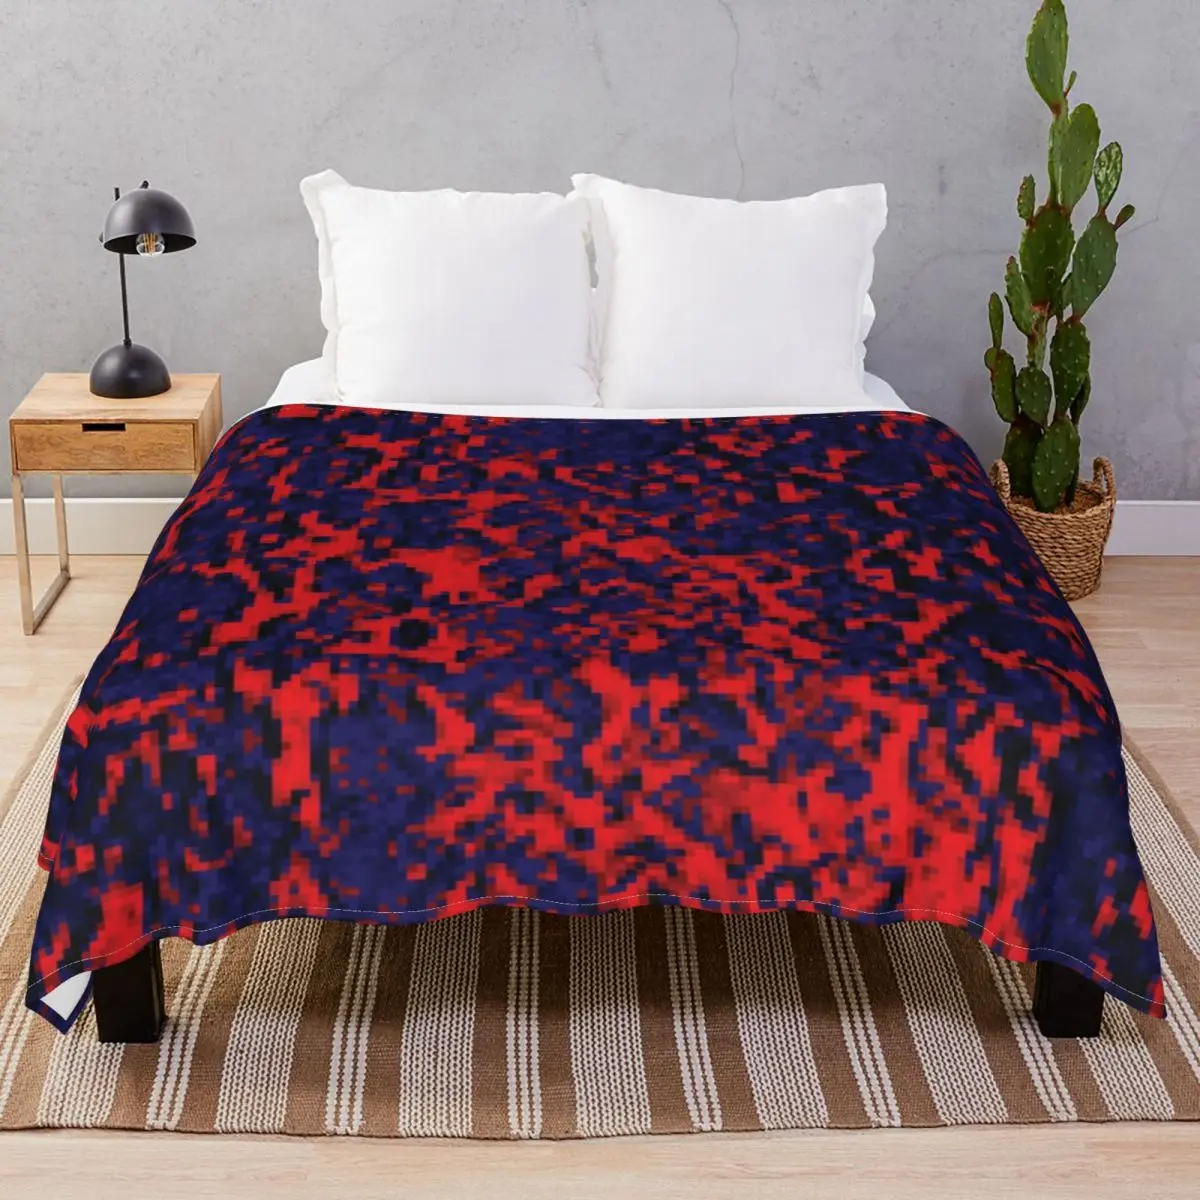 FIREBLU Blanket Flannel Print Breathable Unisex Throw Blankets for Bedding Sofa Camp Office